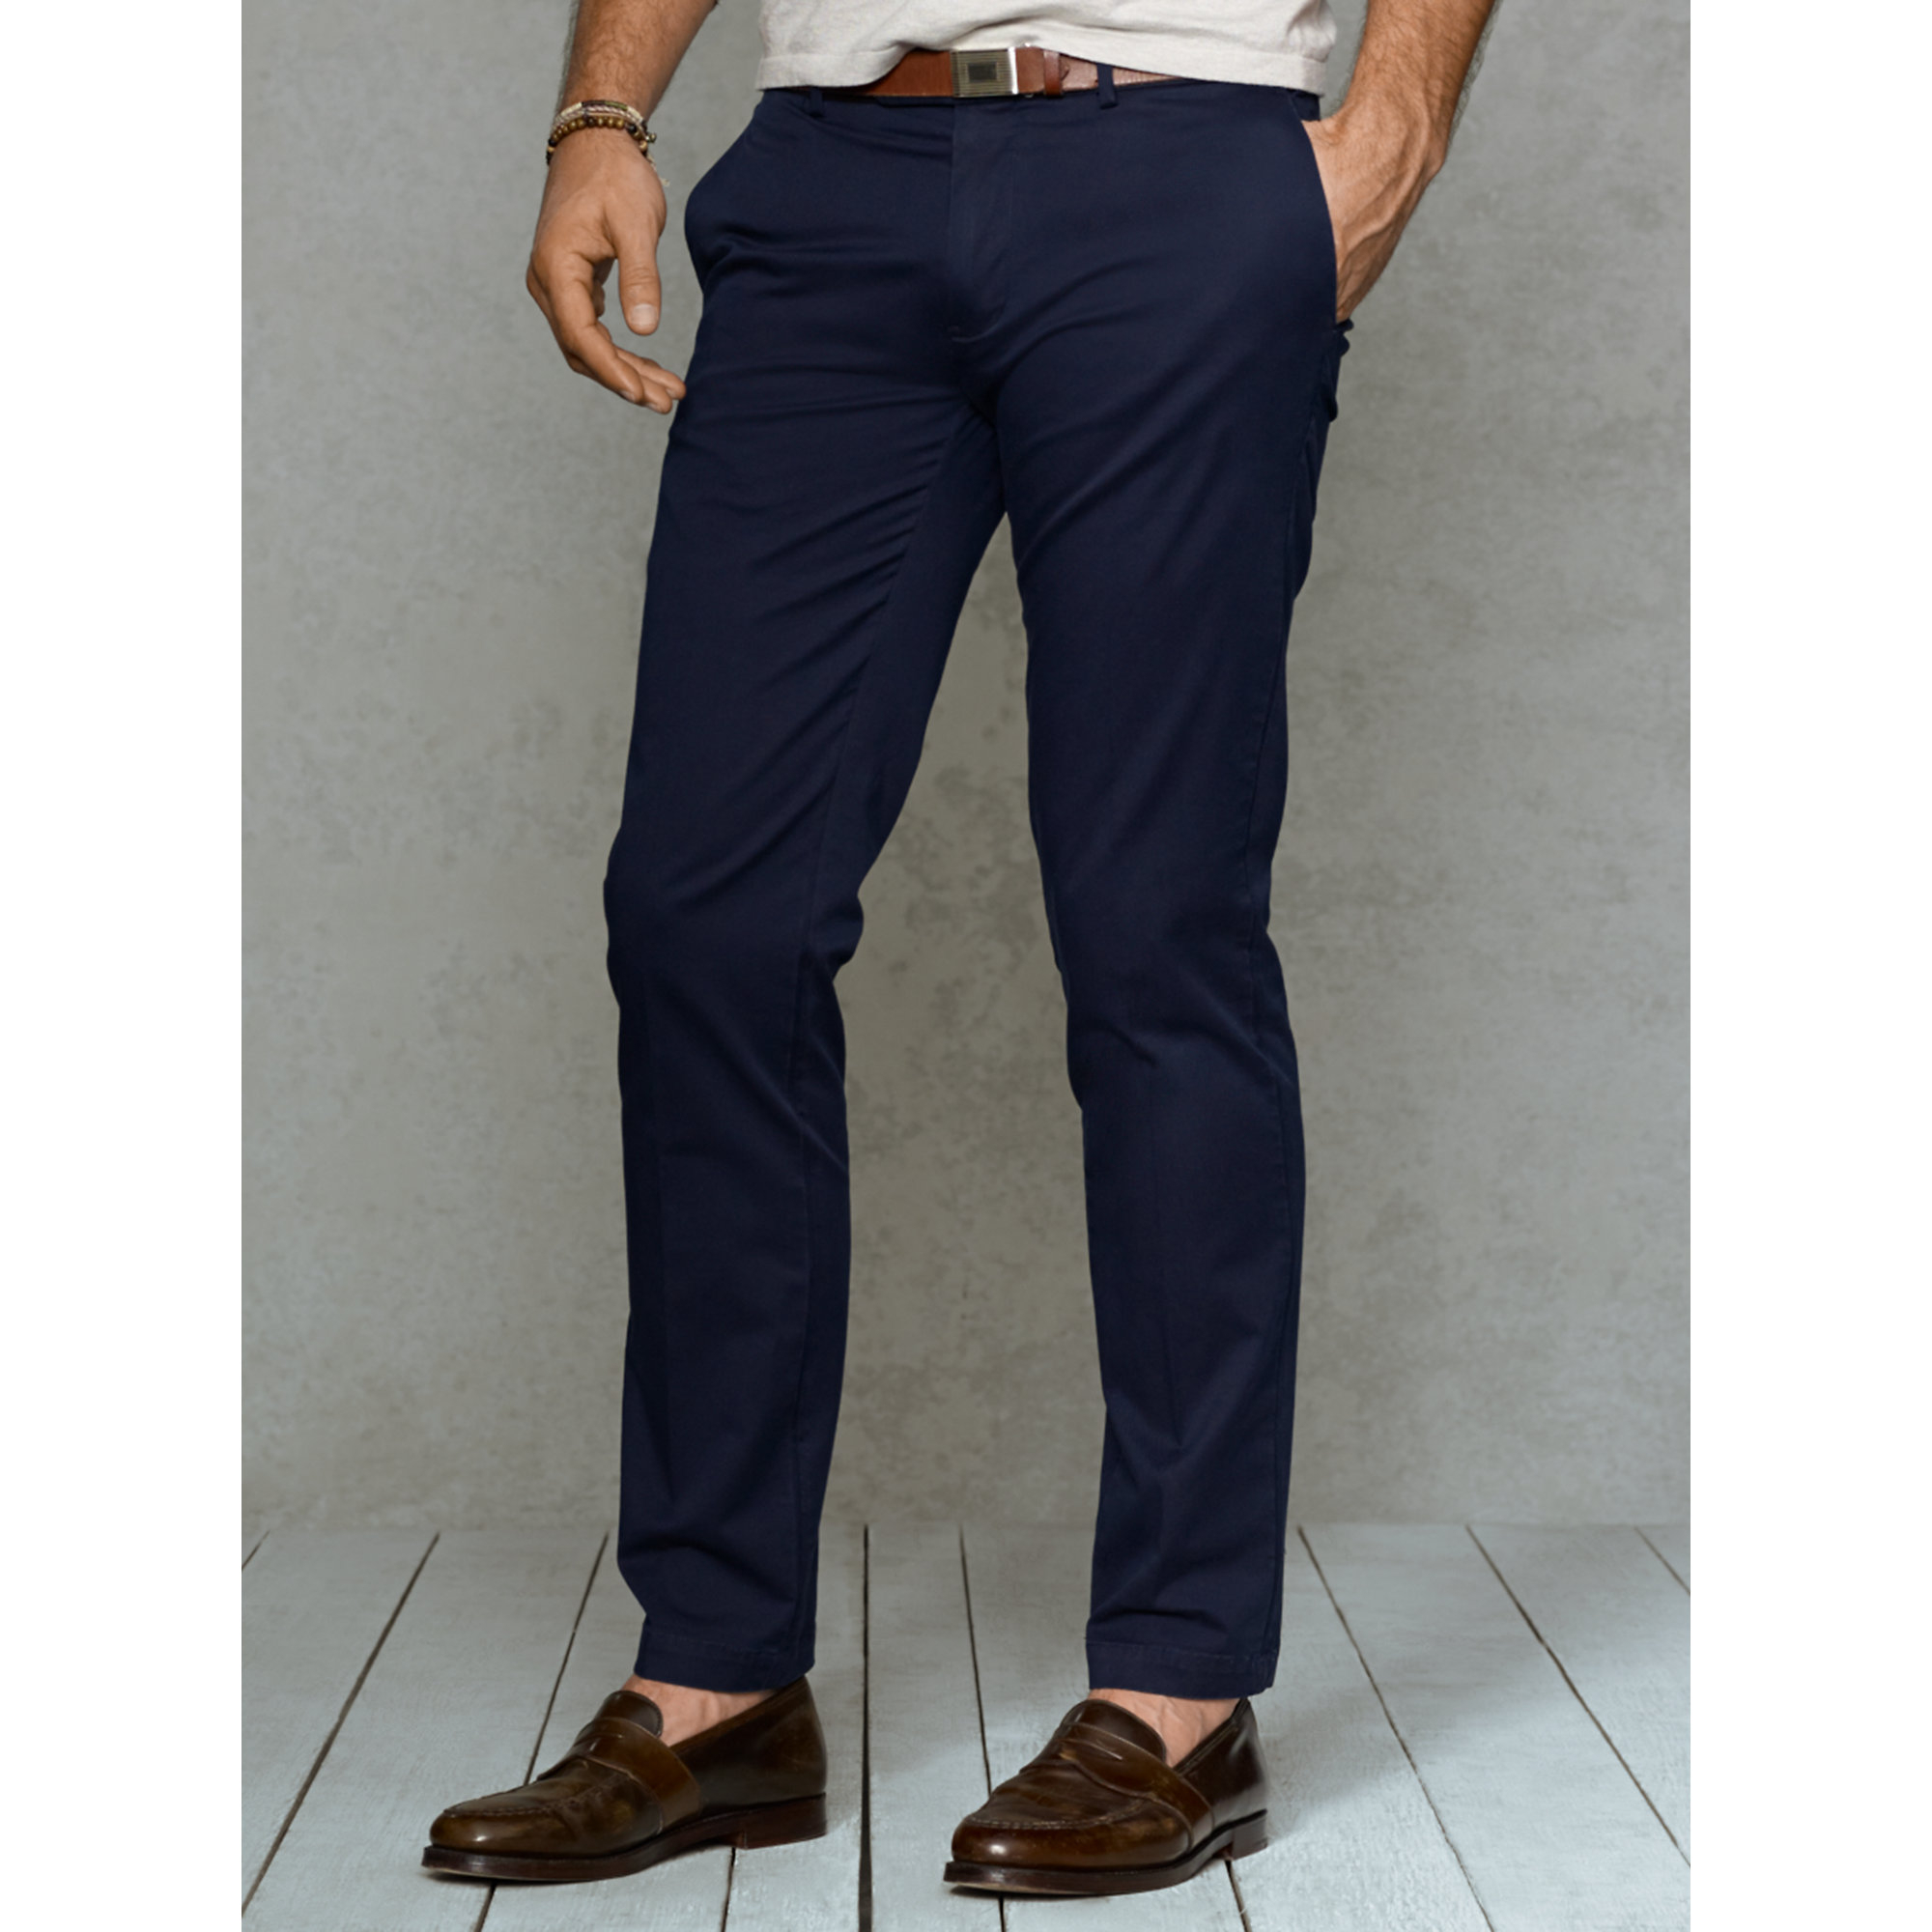 Lyst - Polo Ralph Lauren Slim-fit Stretch-chino Pant in Blue for Men